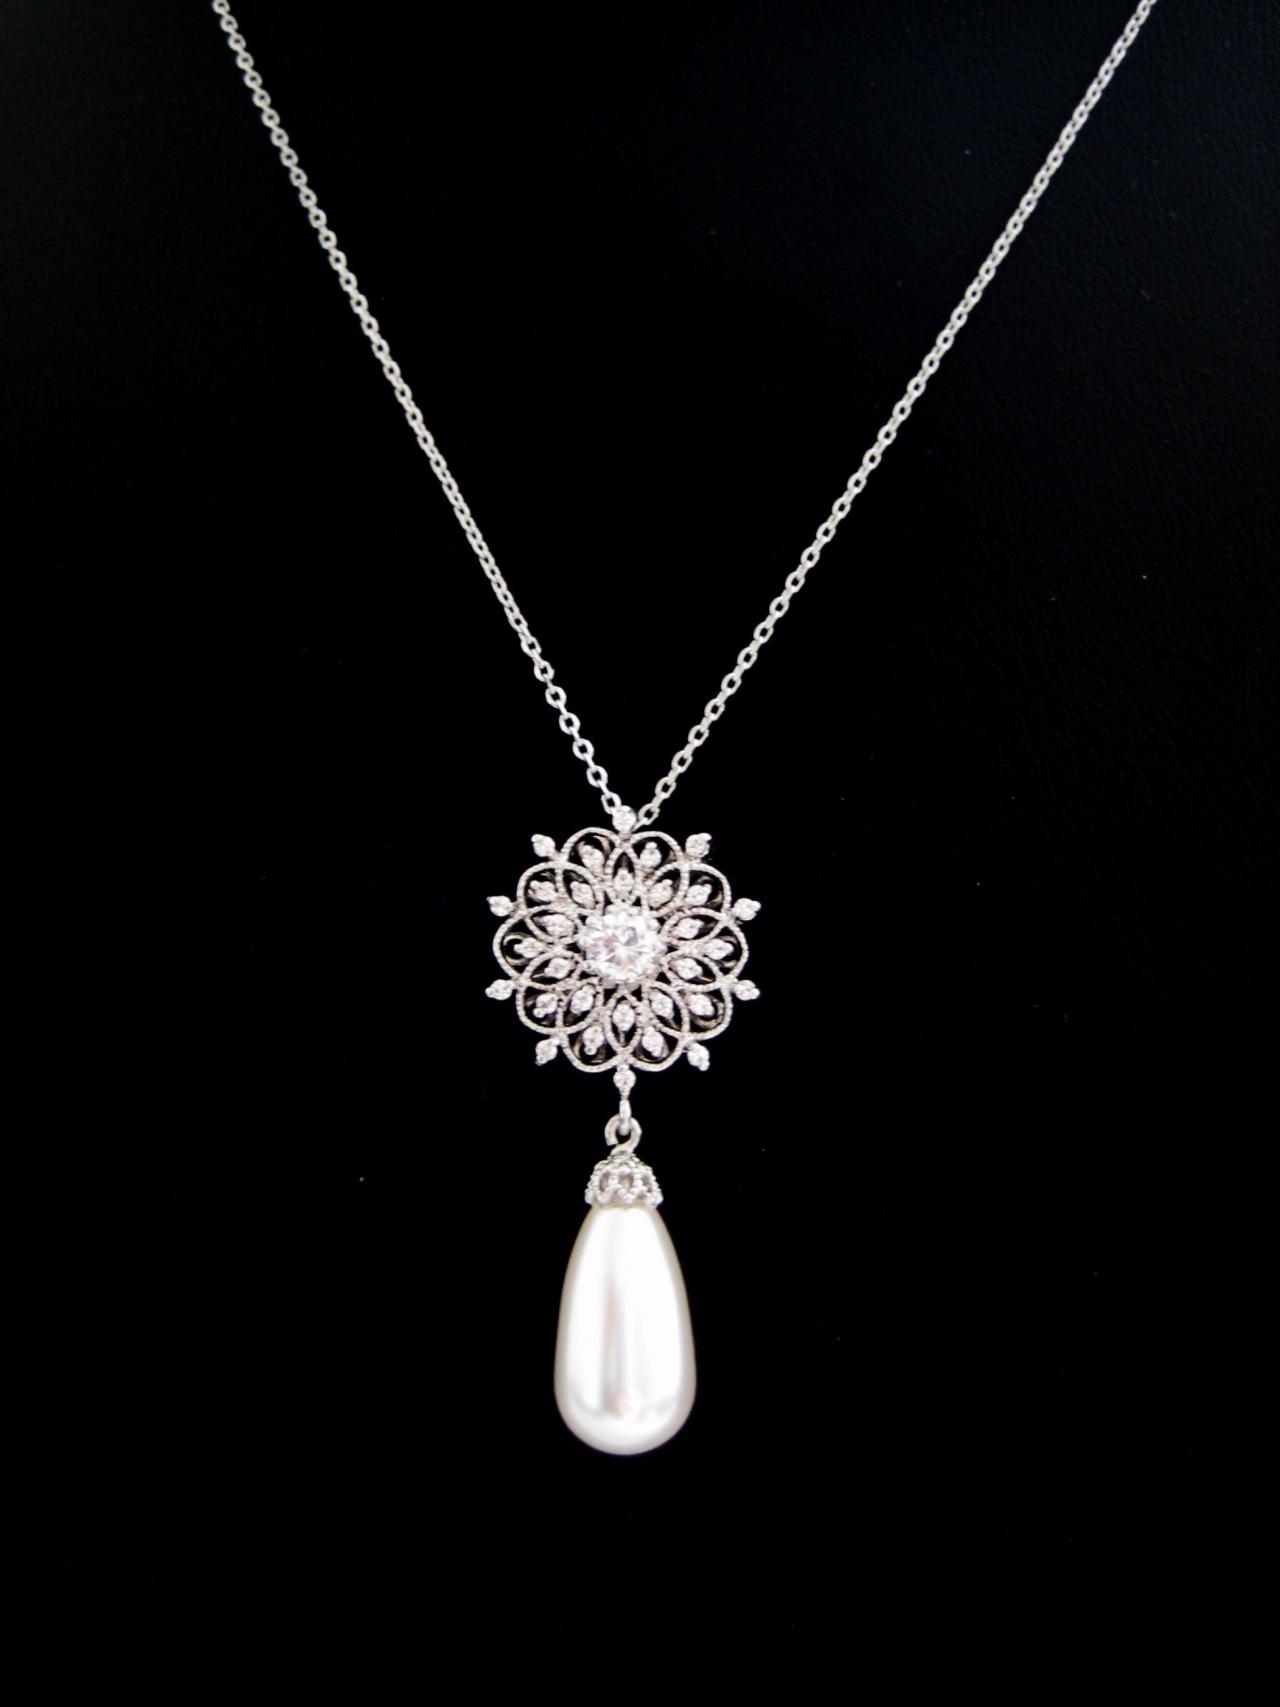 Bridal,Prom,Bridesmaids,Choose 1,2 or 3 UK White Large /& Small Pearl Necklaces